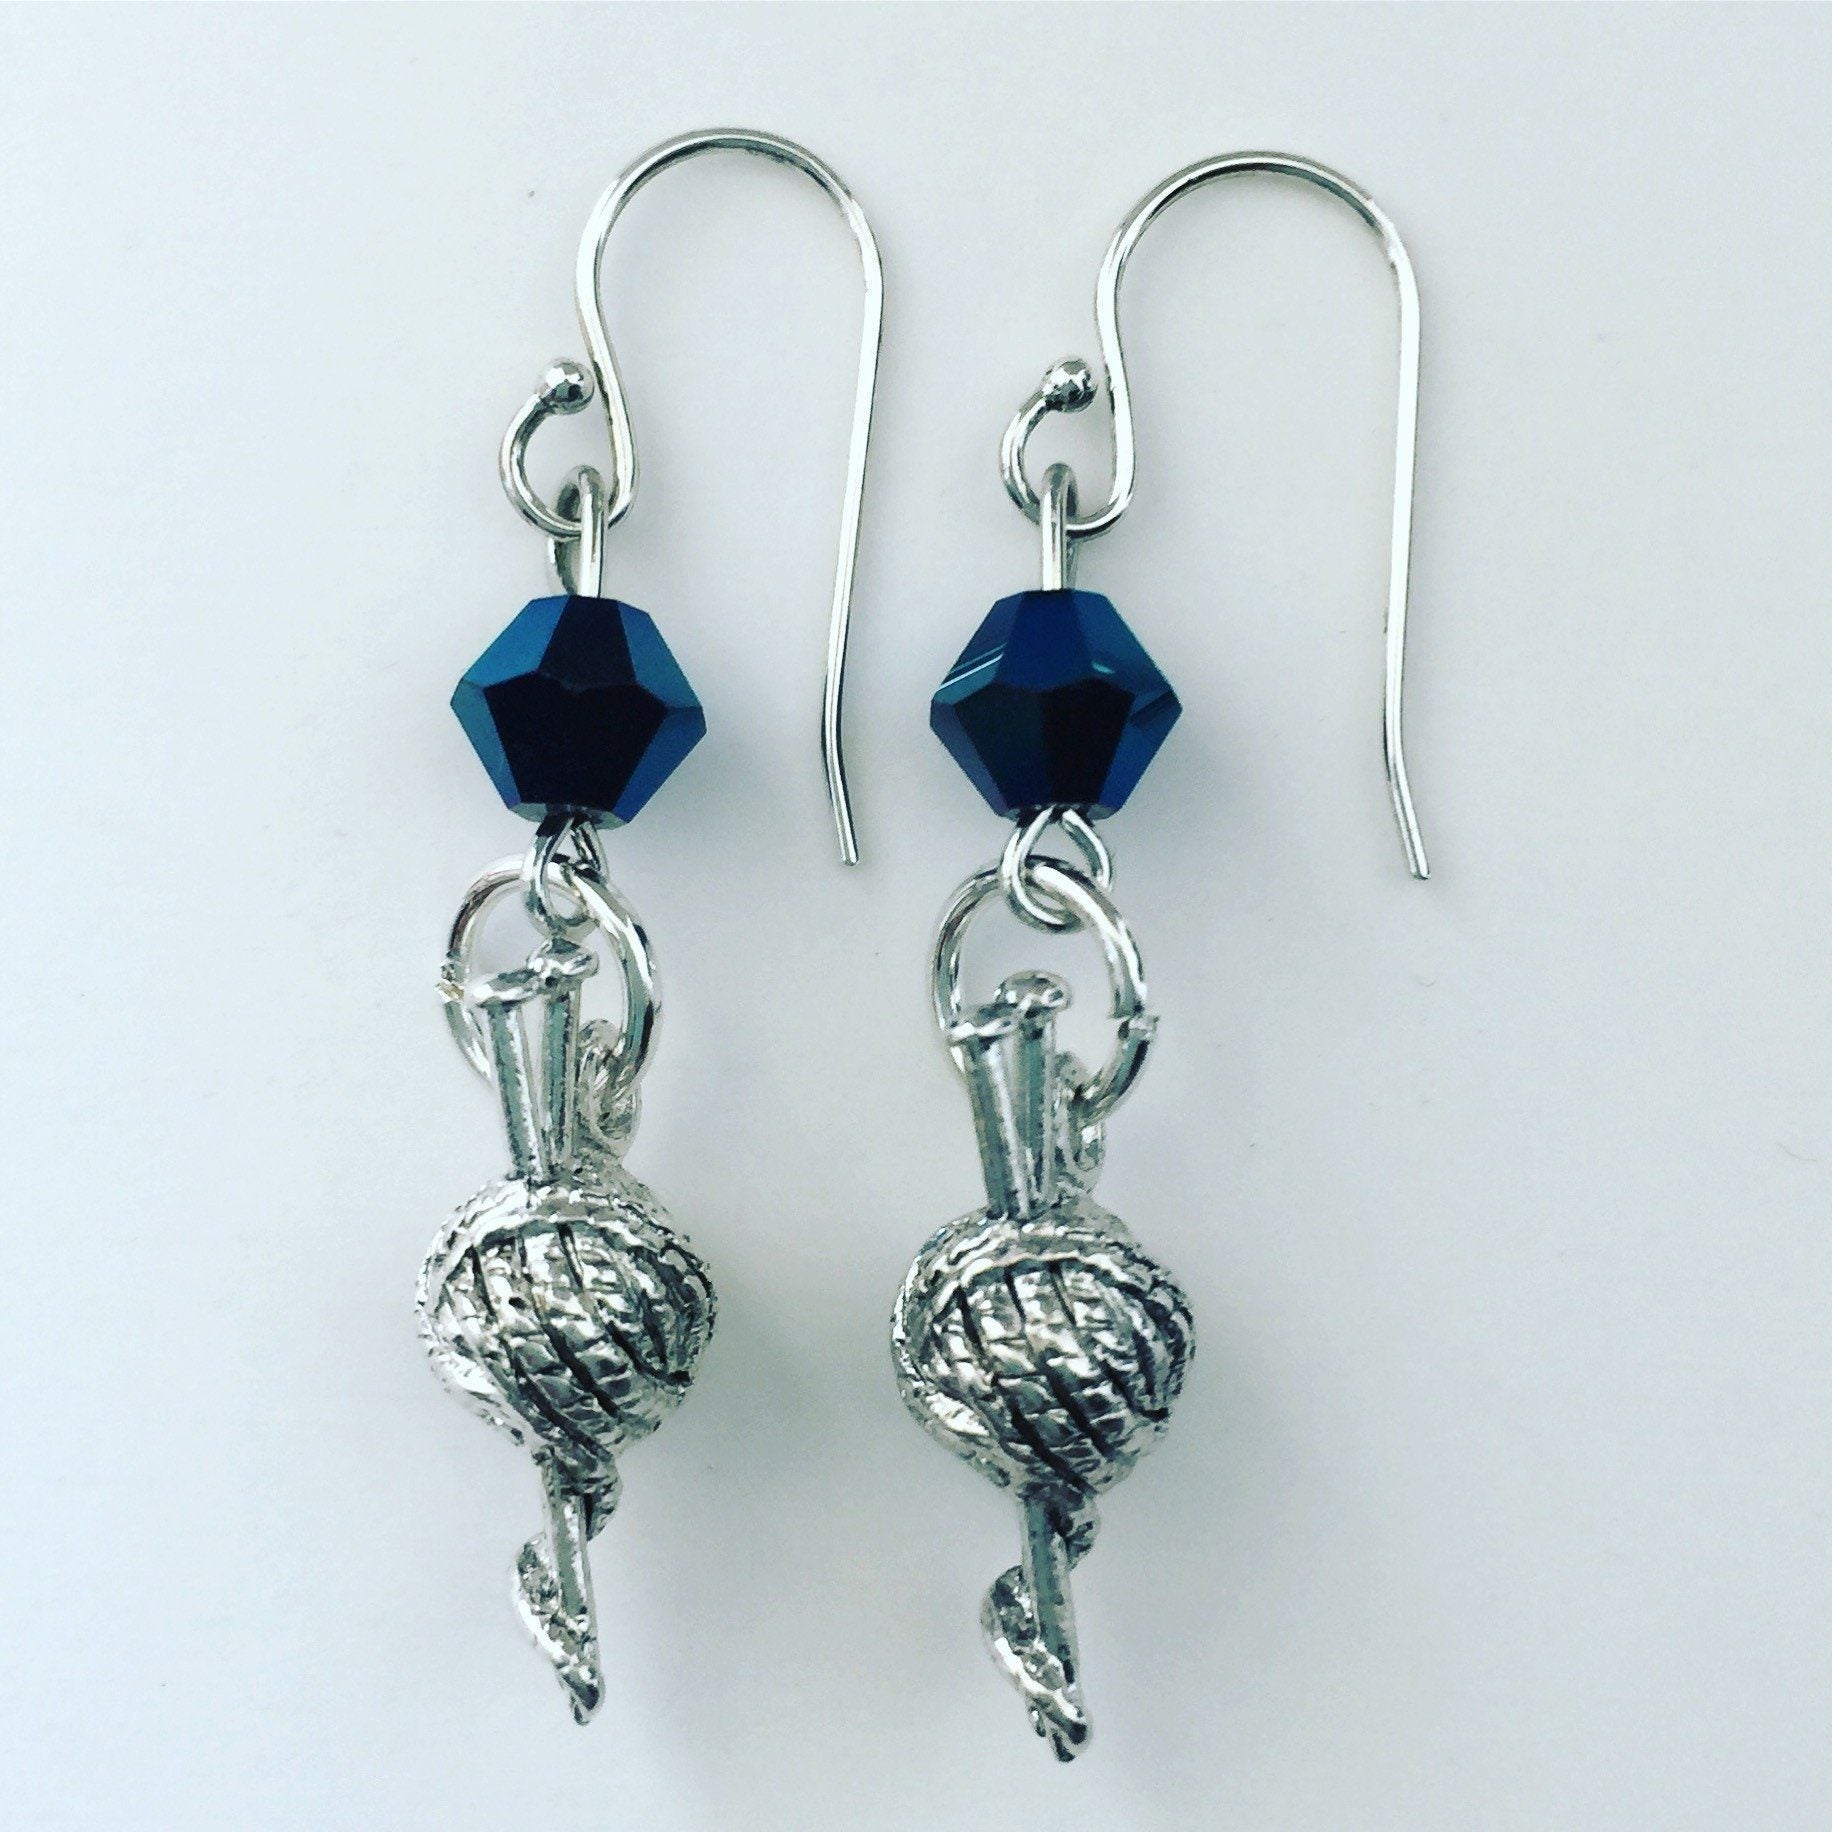 Knitting Earrings with Blue Swarovski Crystals